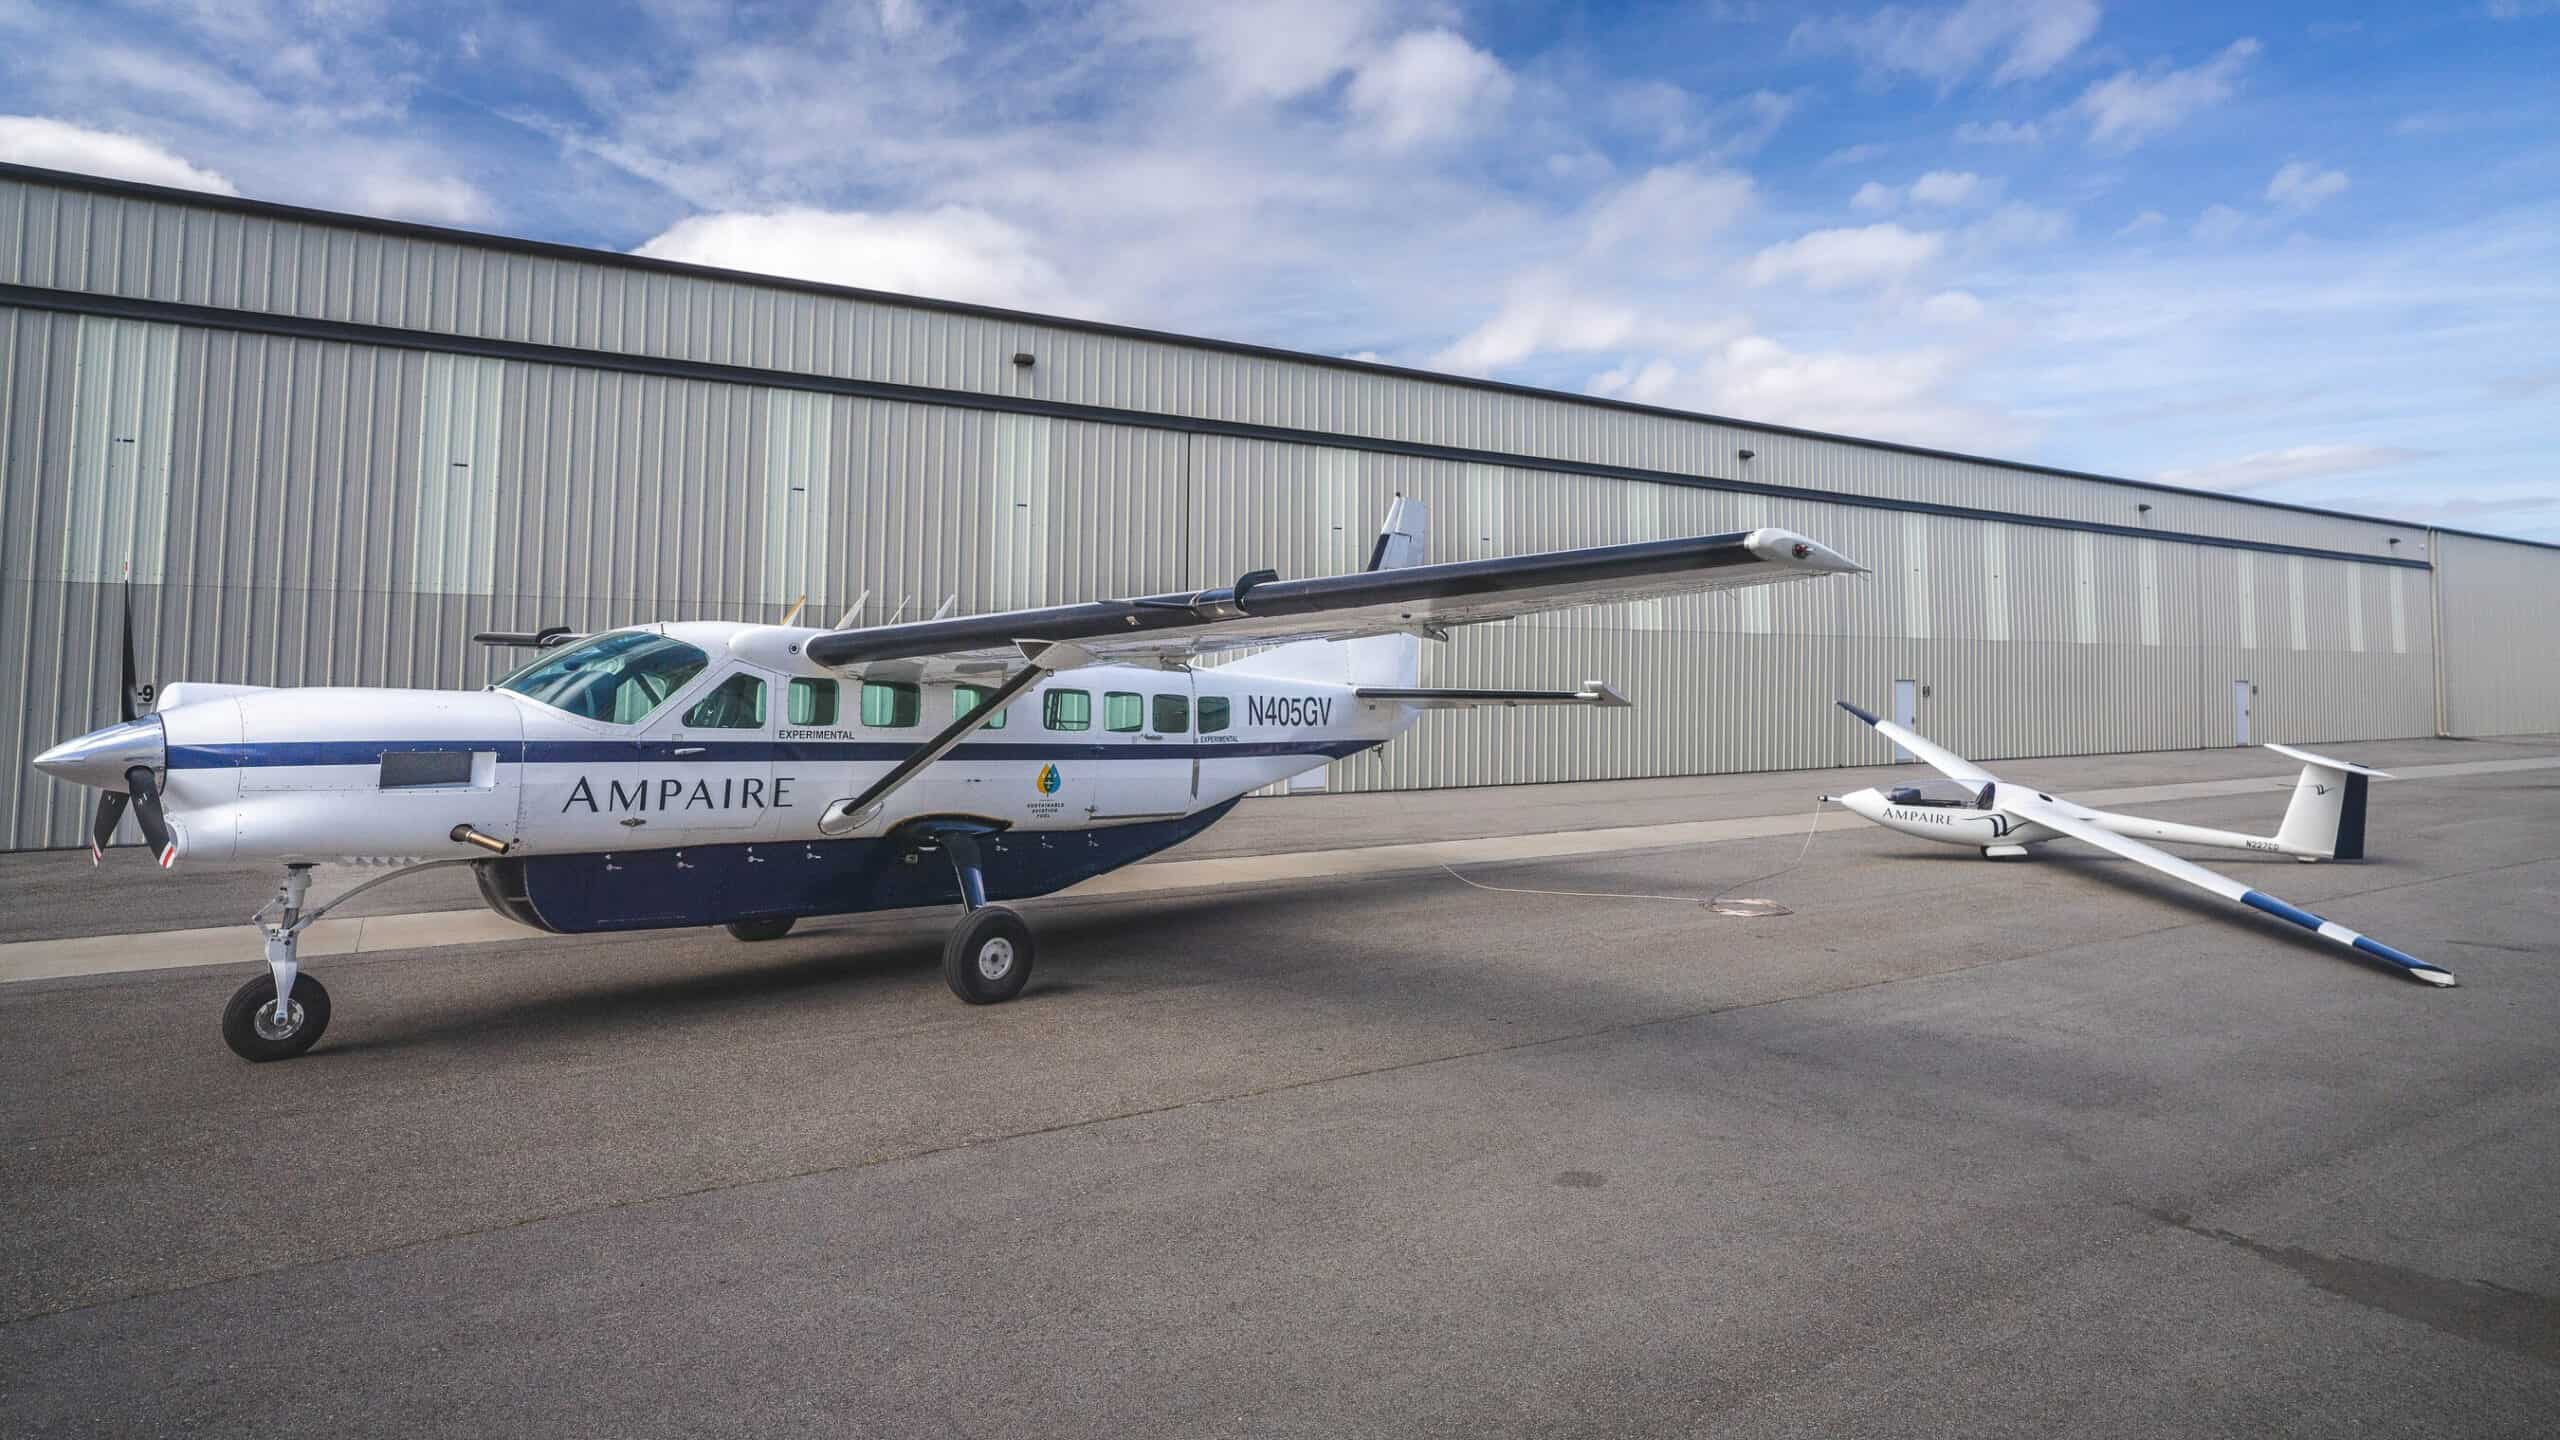 Ampaire Eco Caravan in Camarillo, CA. The Magpie approach works by towing an electric airplane through the sky with a high-performance electrified tow aircraft.